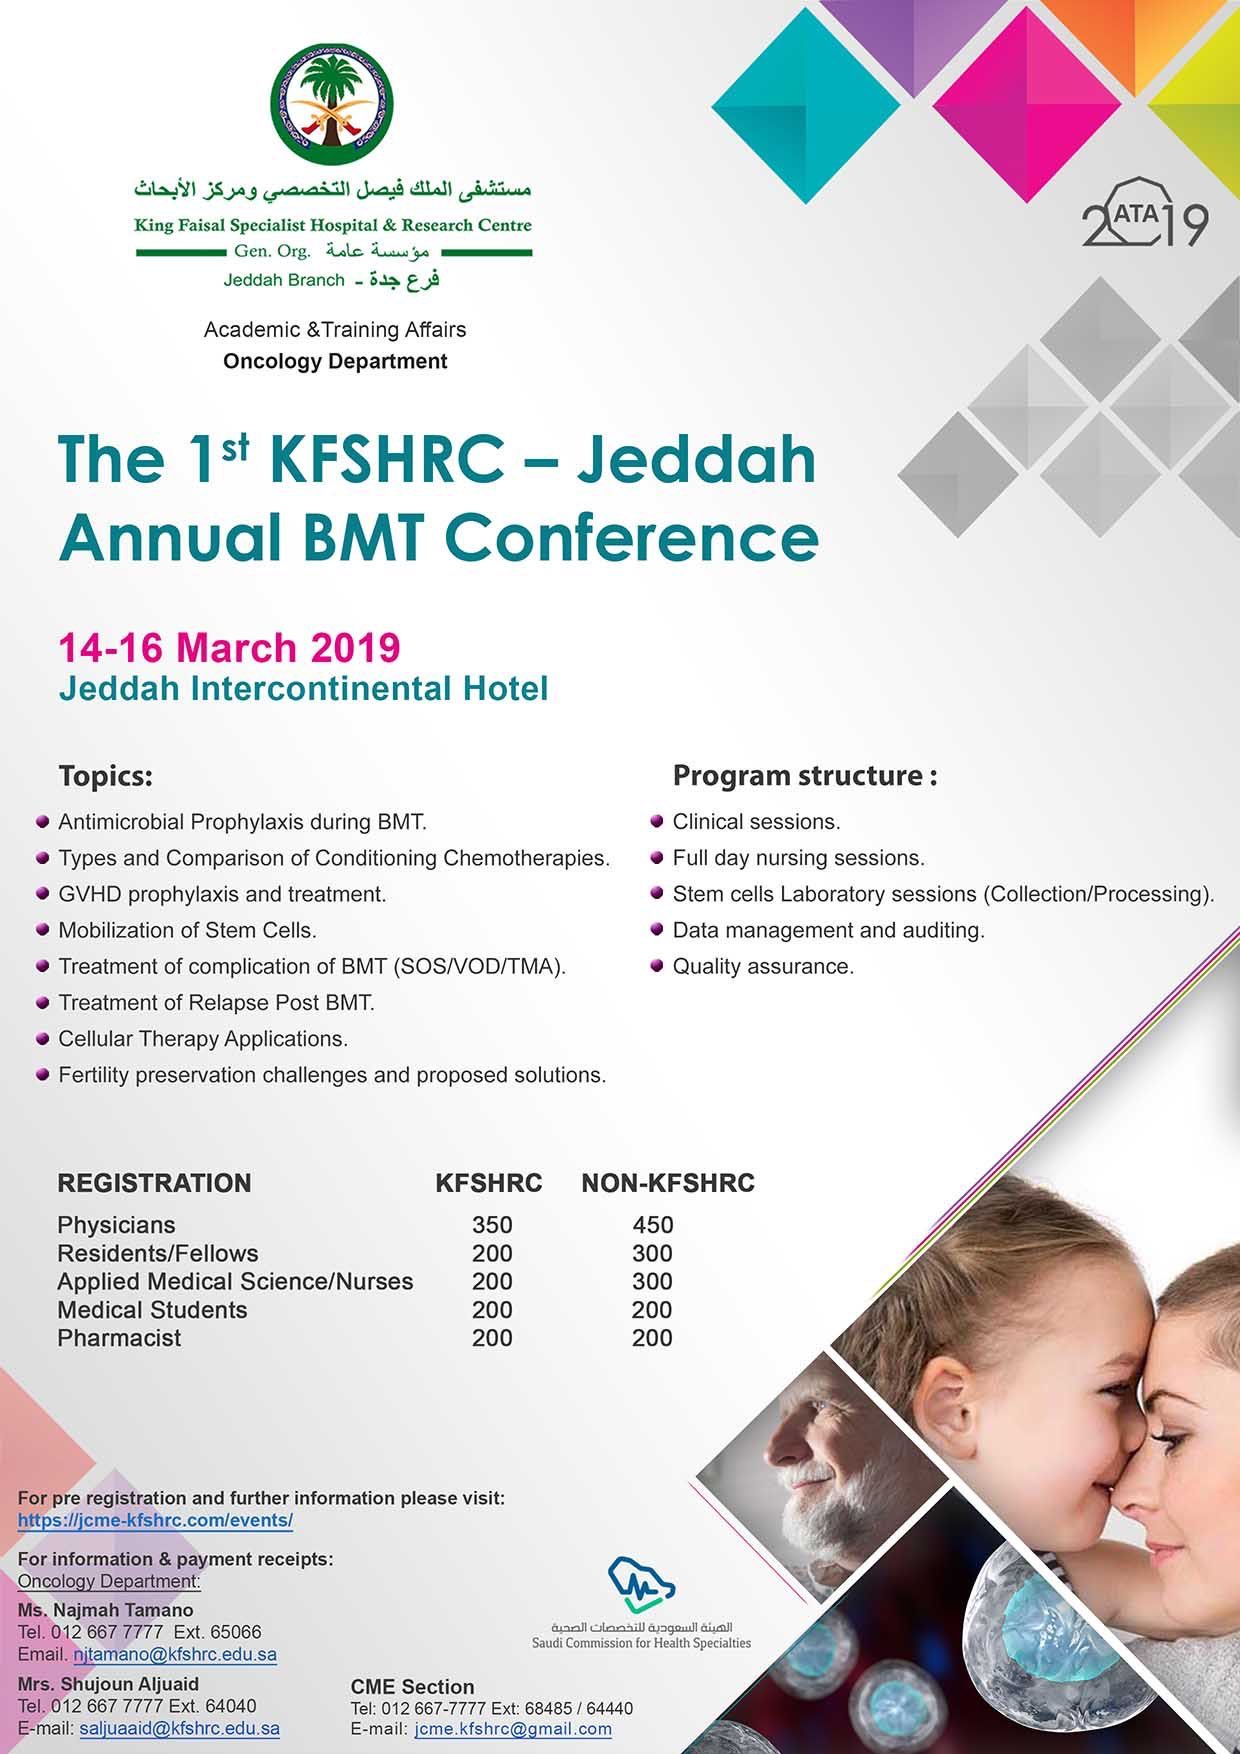 The 1st KFSHRC Jeddah Annual BMT Conference